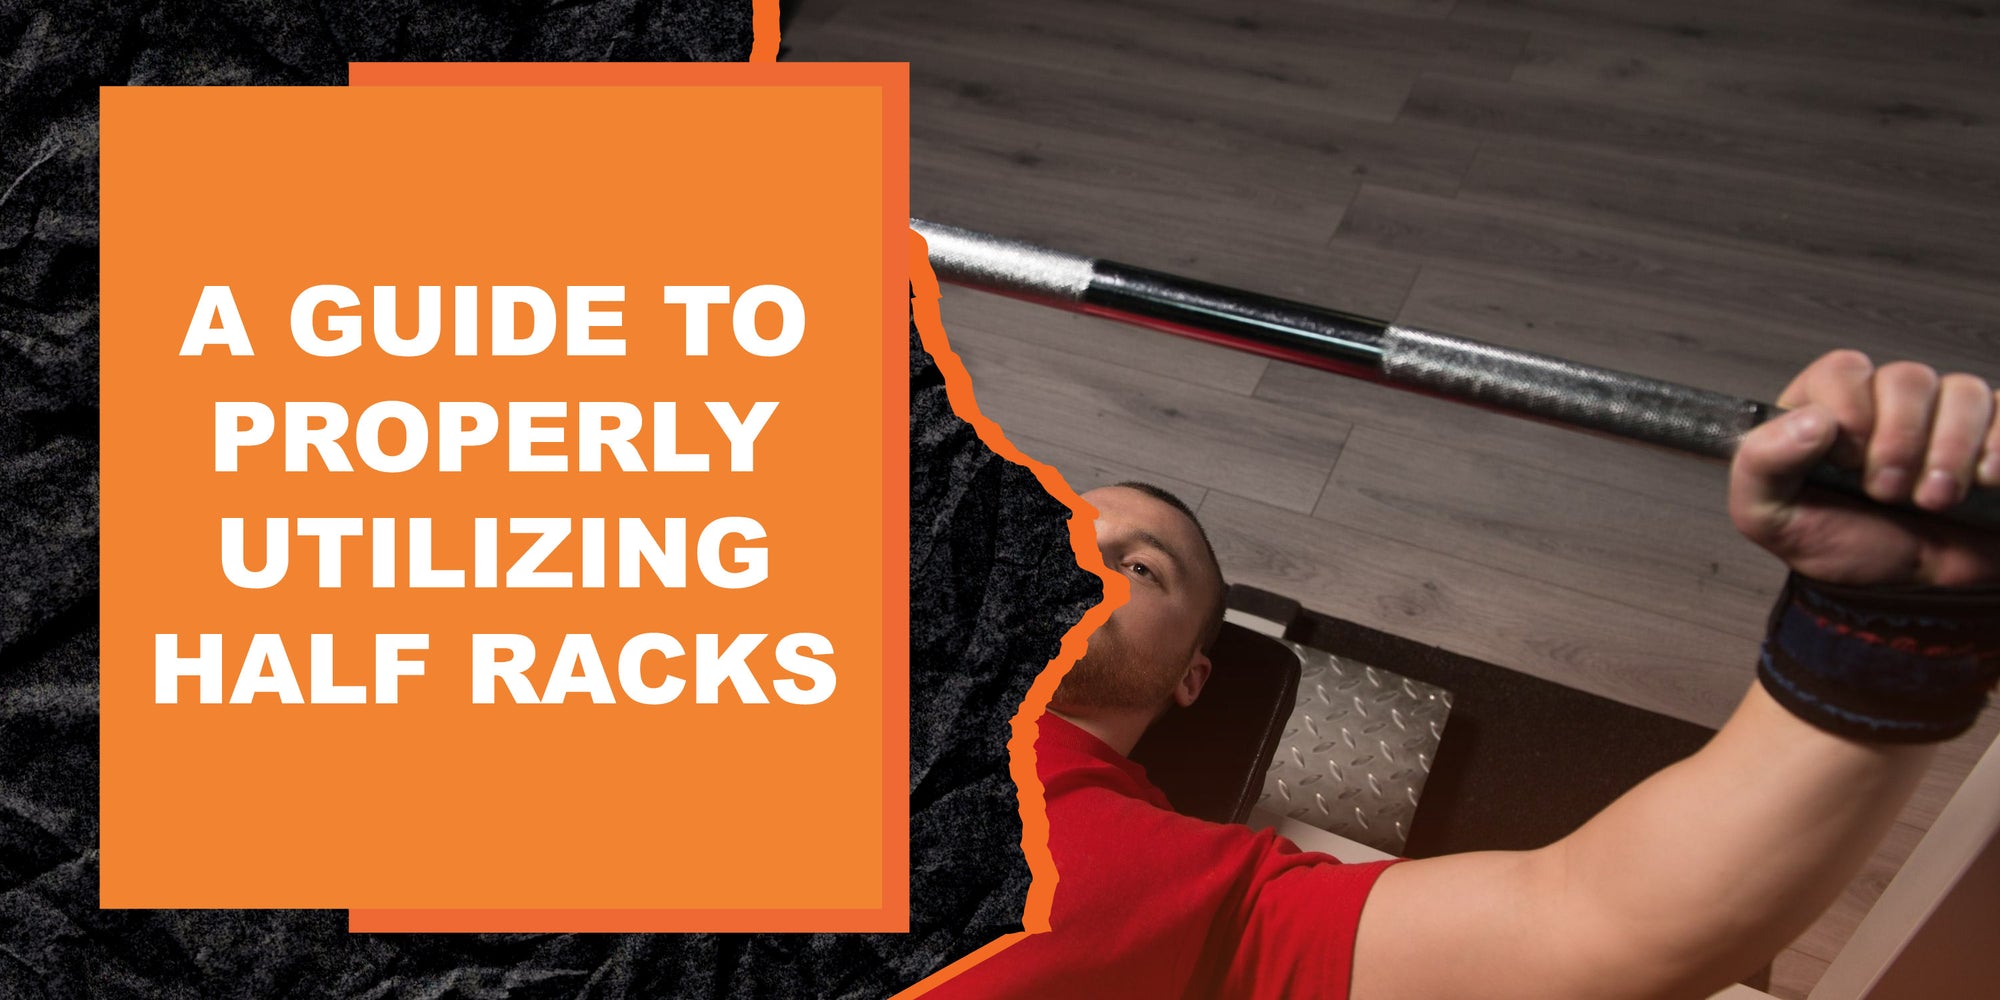 A Guide to Properly Utilizing Half Racks